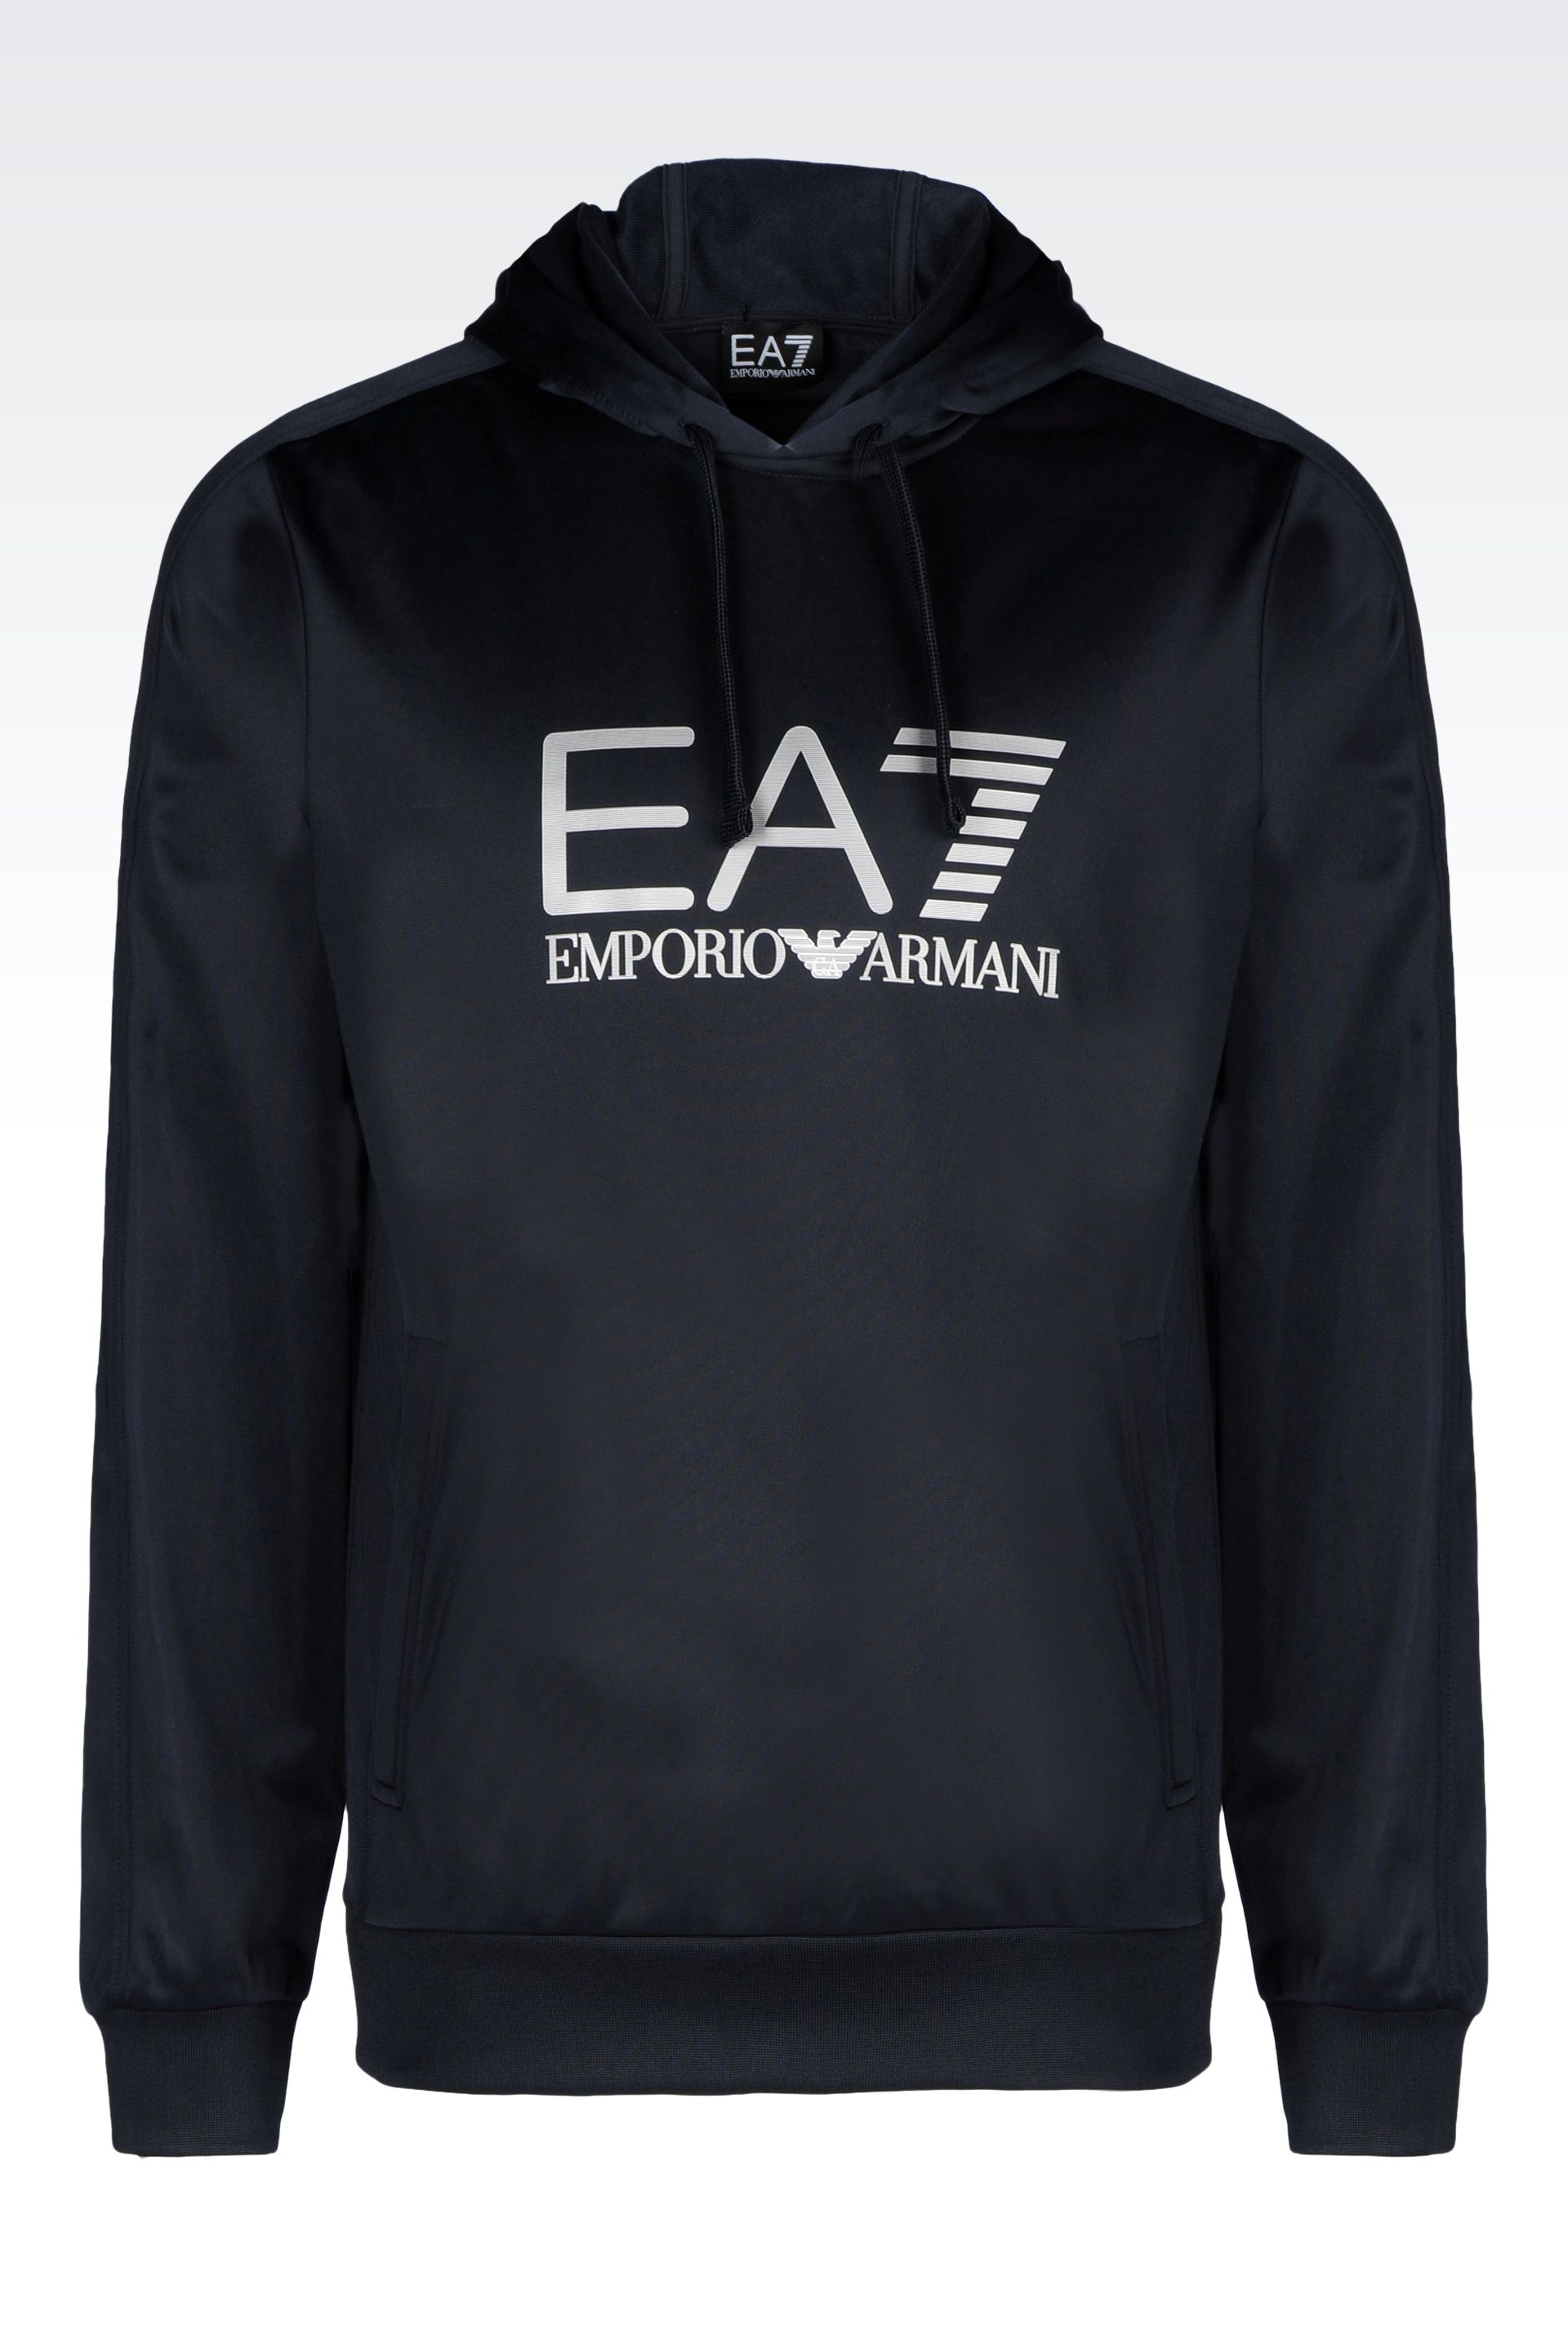 EA7 Visibility Line Hooded Sweatshirt in Blue for Men - Lyst